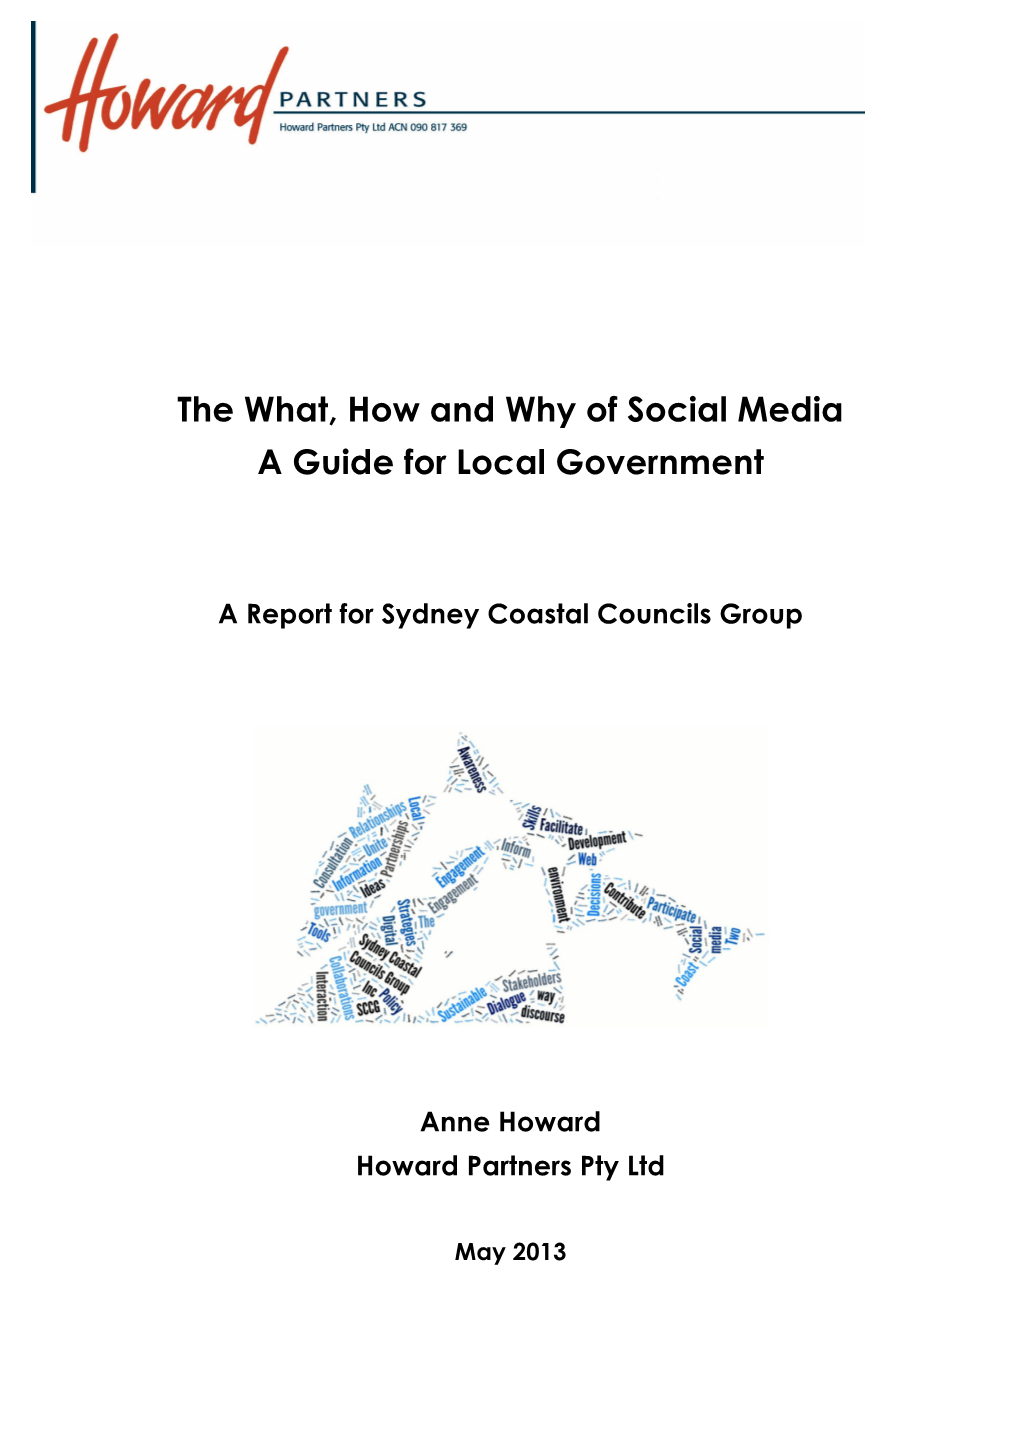 The What, How and Why of Social Media a Guide for Local Government